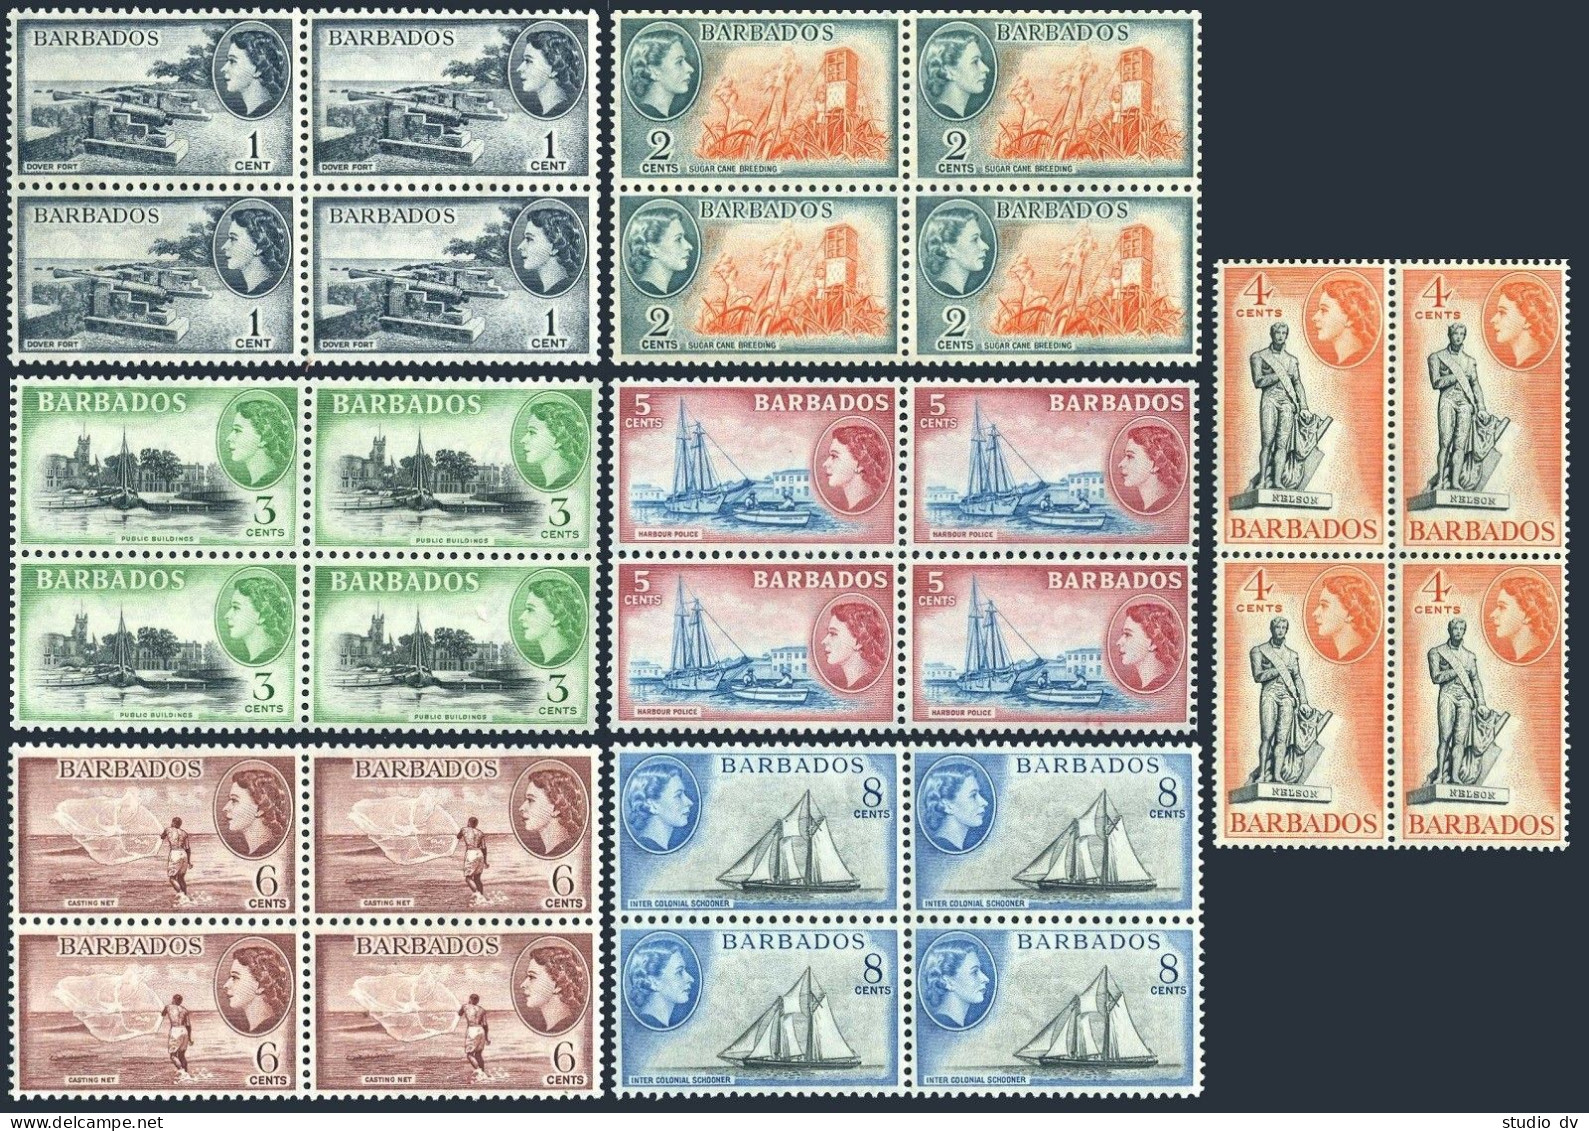 Barbados 235-241,MNH.Michel 203-209.QE II,1953.Dover Fort,Sugar Cane,Nelson,Ship - Barbades (1966-...)